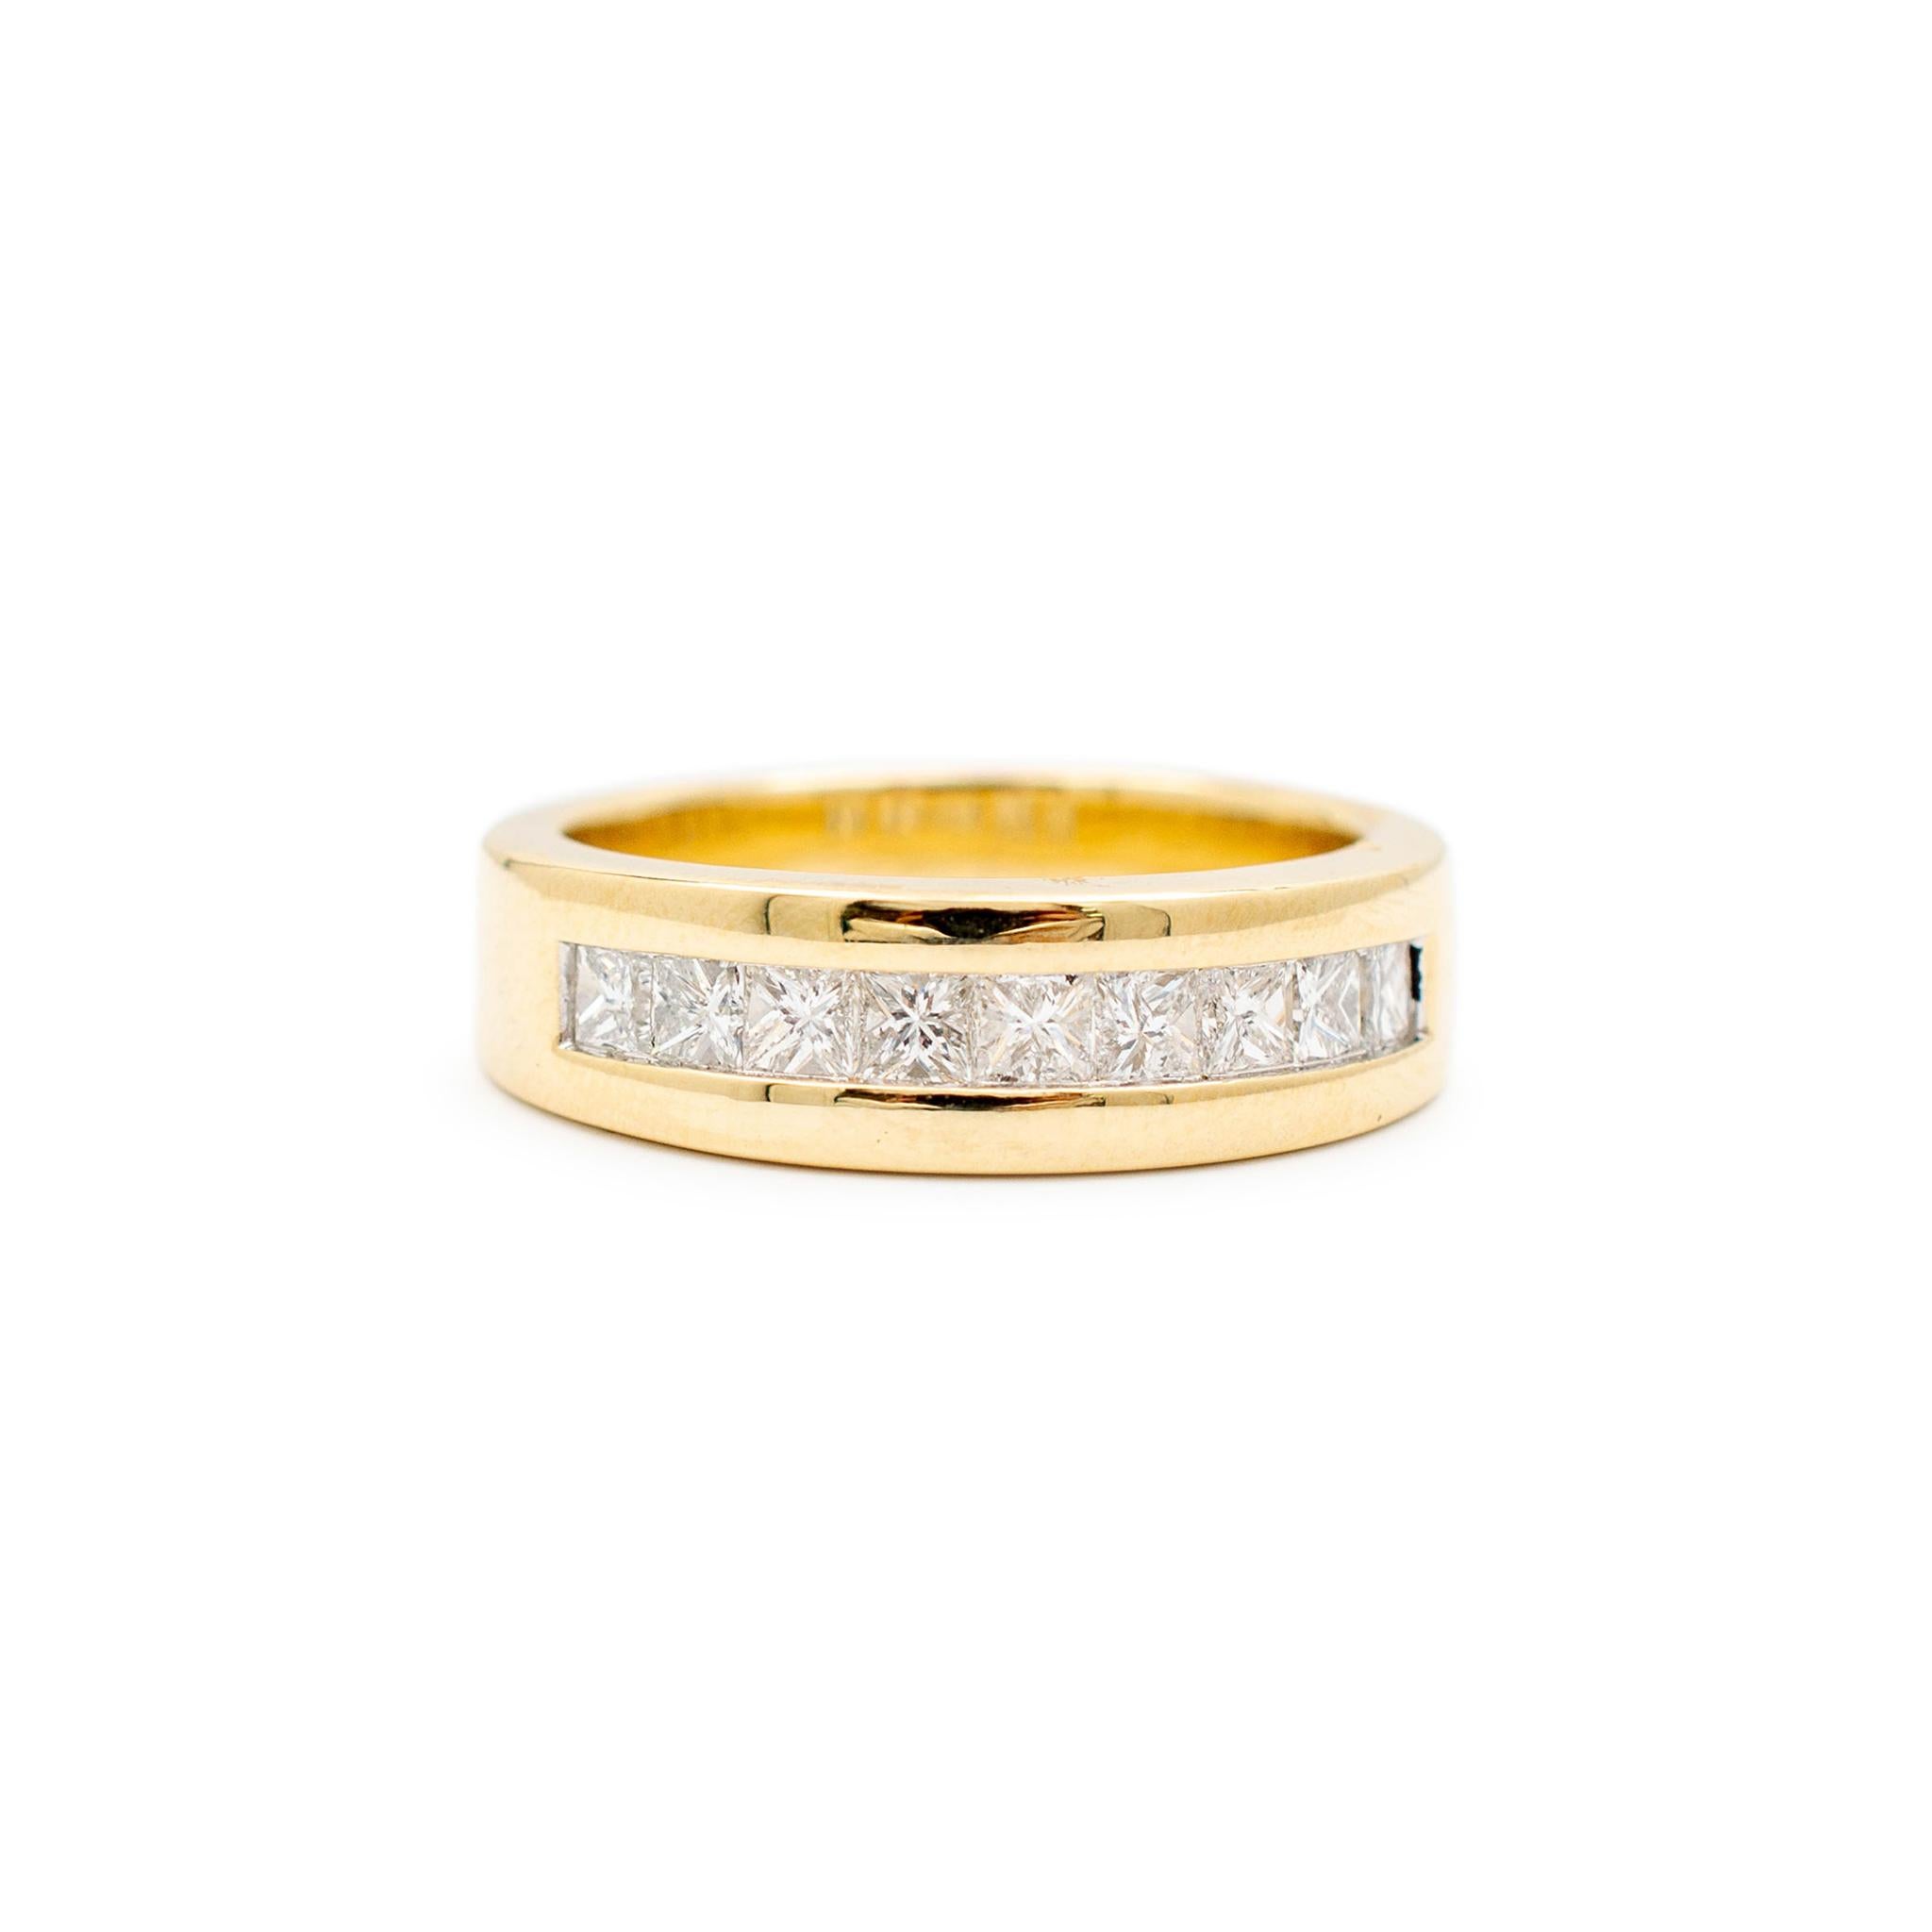 Gender: Unisex

Material: 14K Yellow Gold

Ring Size: 10

Shank Width: 6.90 mm

Weight: 11.10 grams

Ladies 14K yellow gold diamond wedding ring with a soft-square shank.

Engraved with 